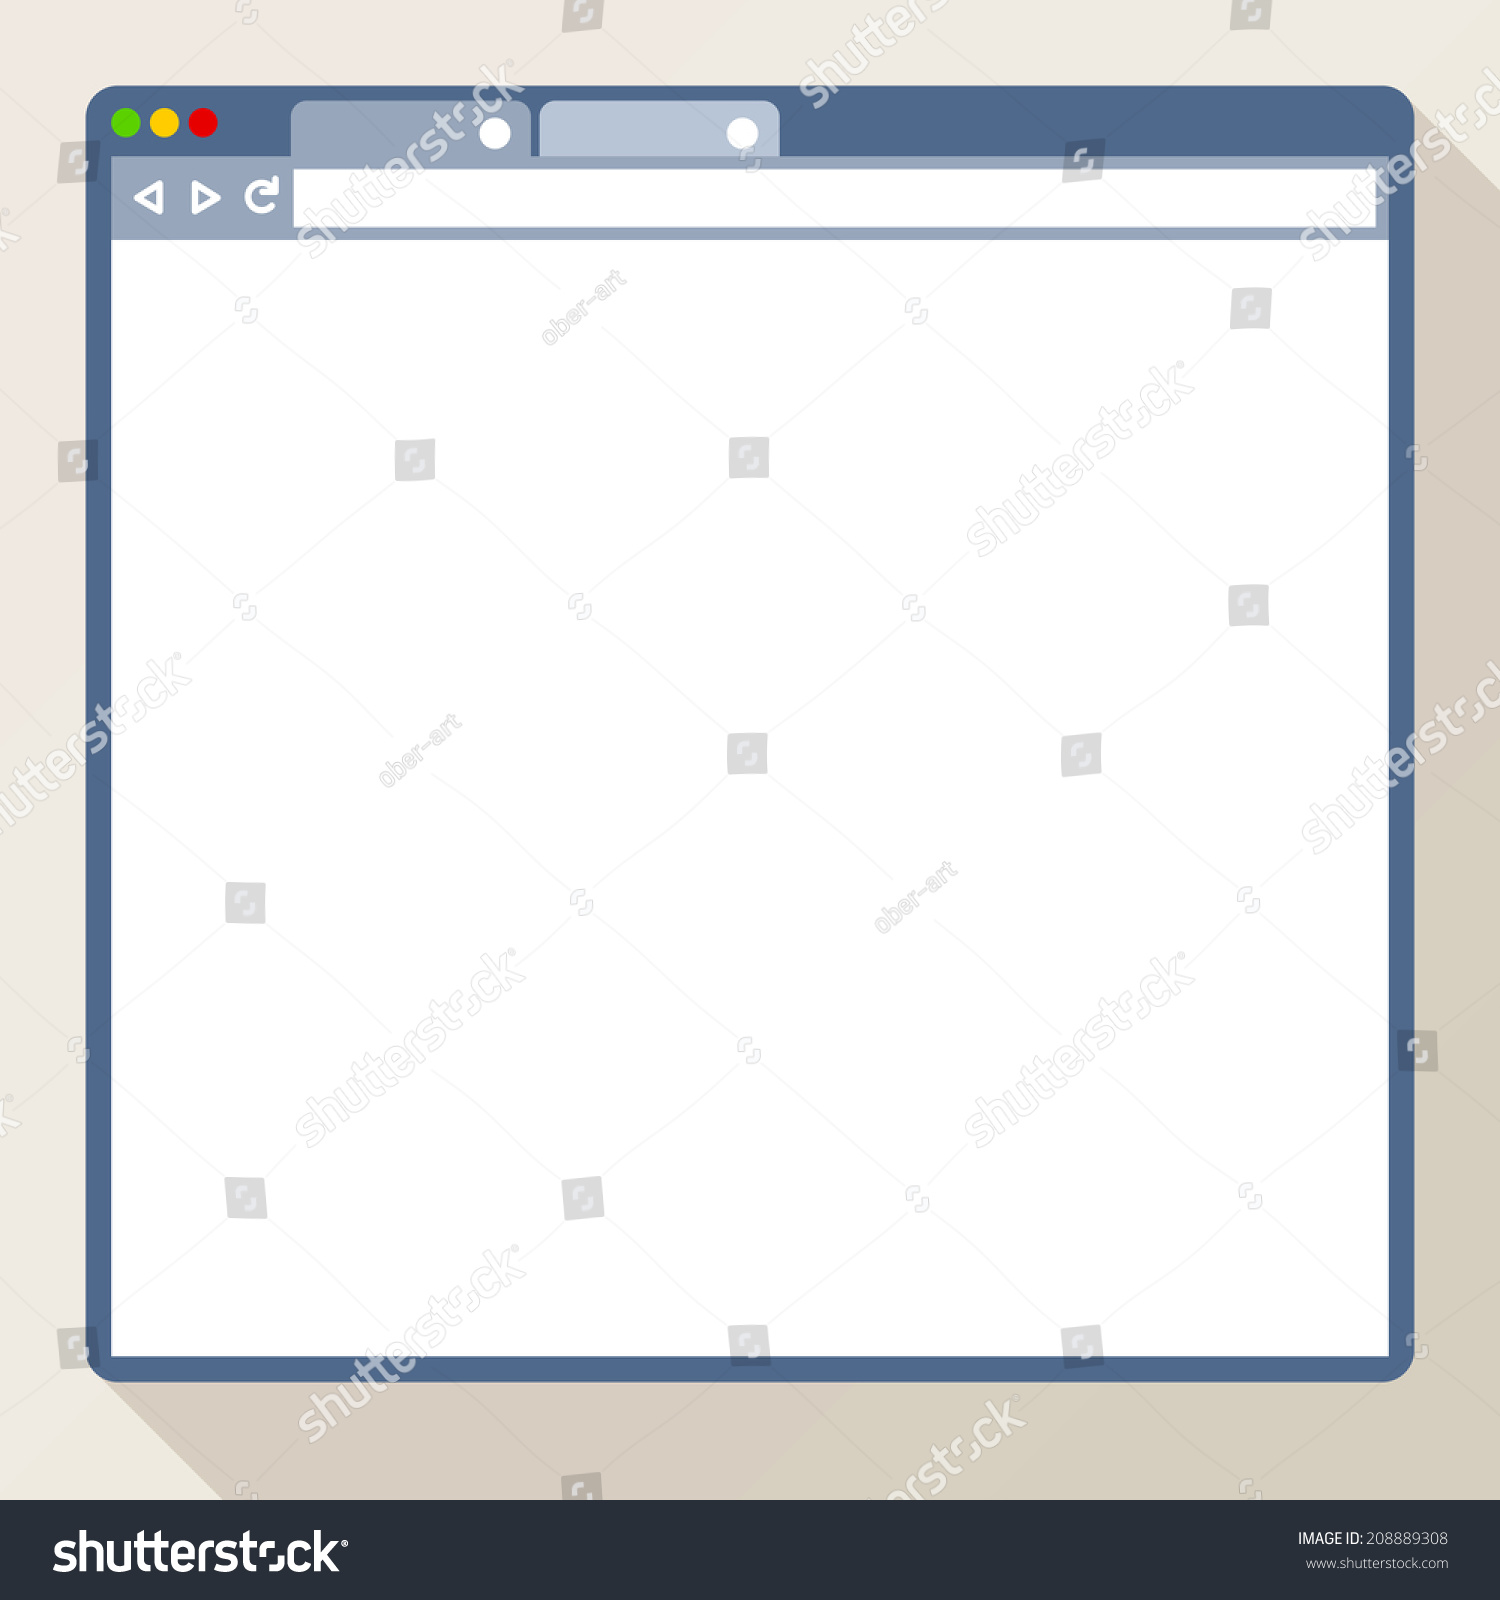 Vector Flat Browser Design Browser Template Stock Vector Royalty Free 808